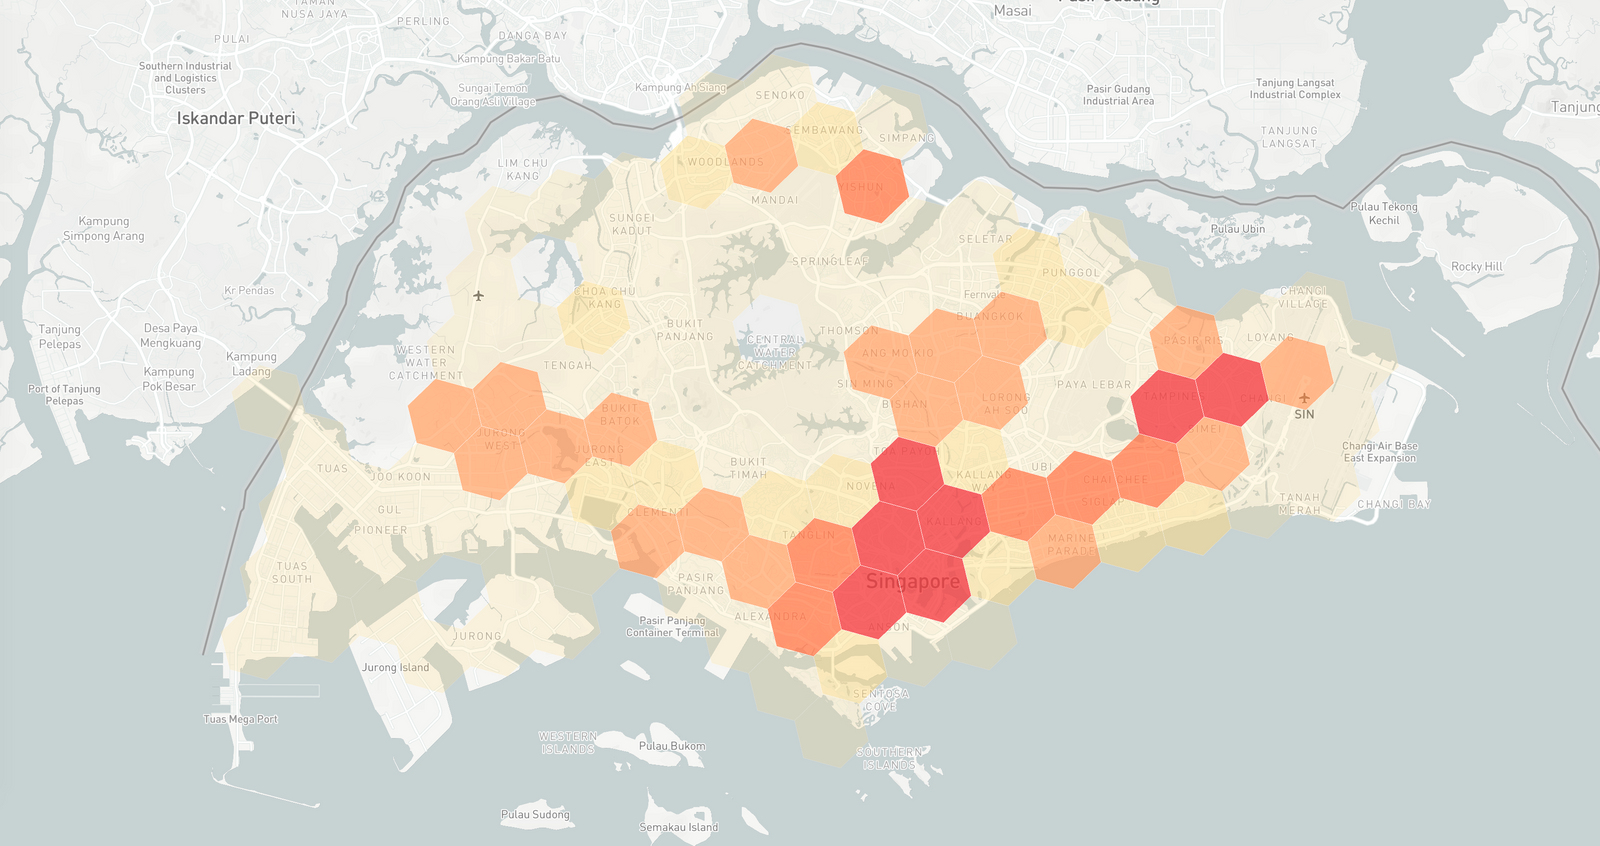 Taxi demand in Singapore visualized using h3 js and react map gl (react mapbox gl)